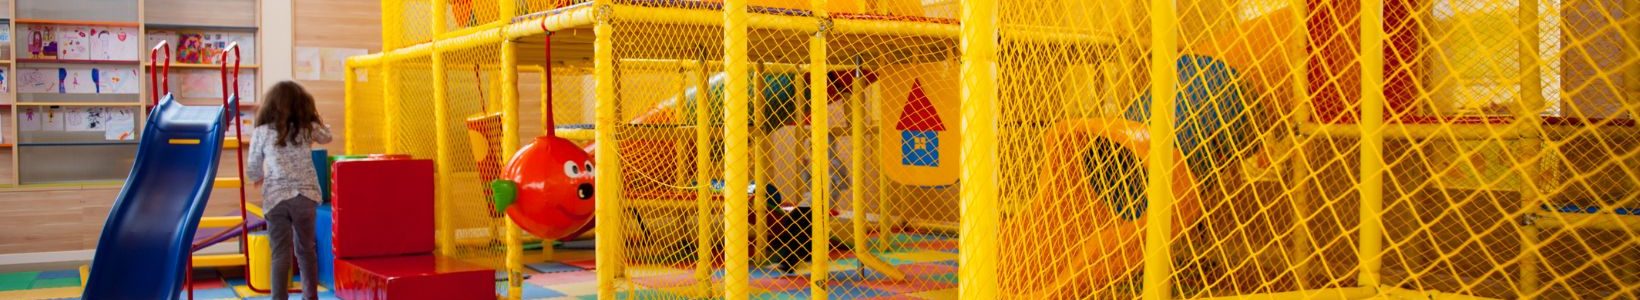 A yellow indoor playground with a small child playing.